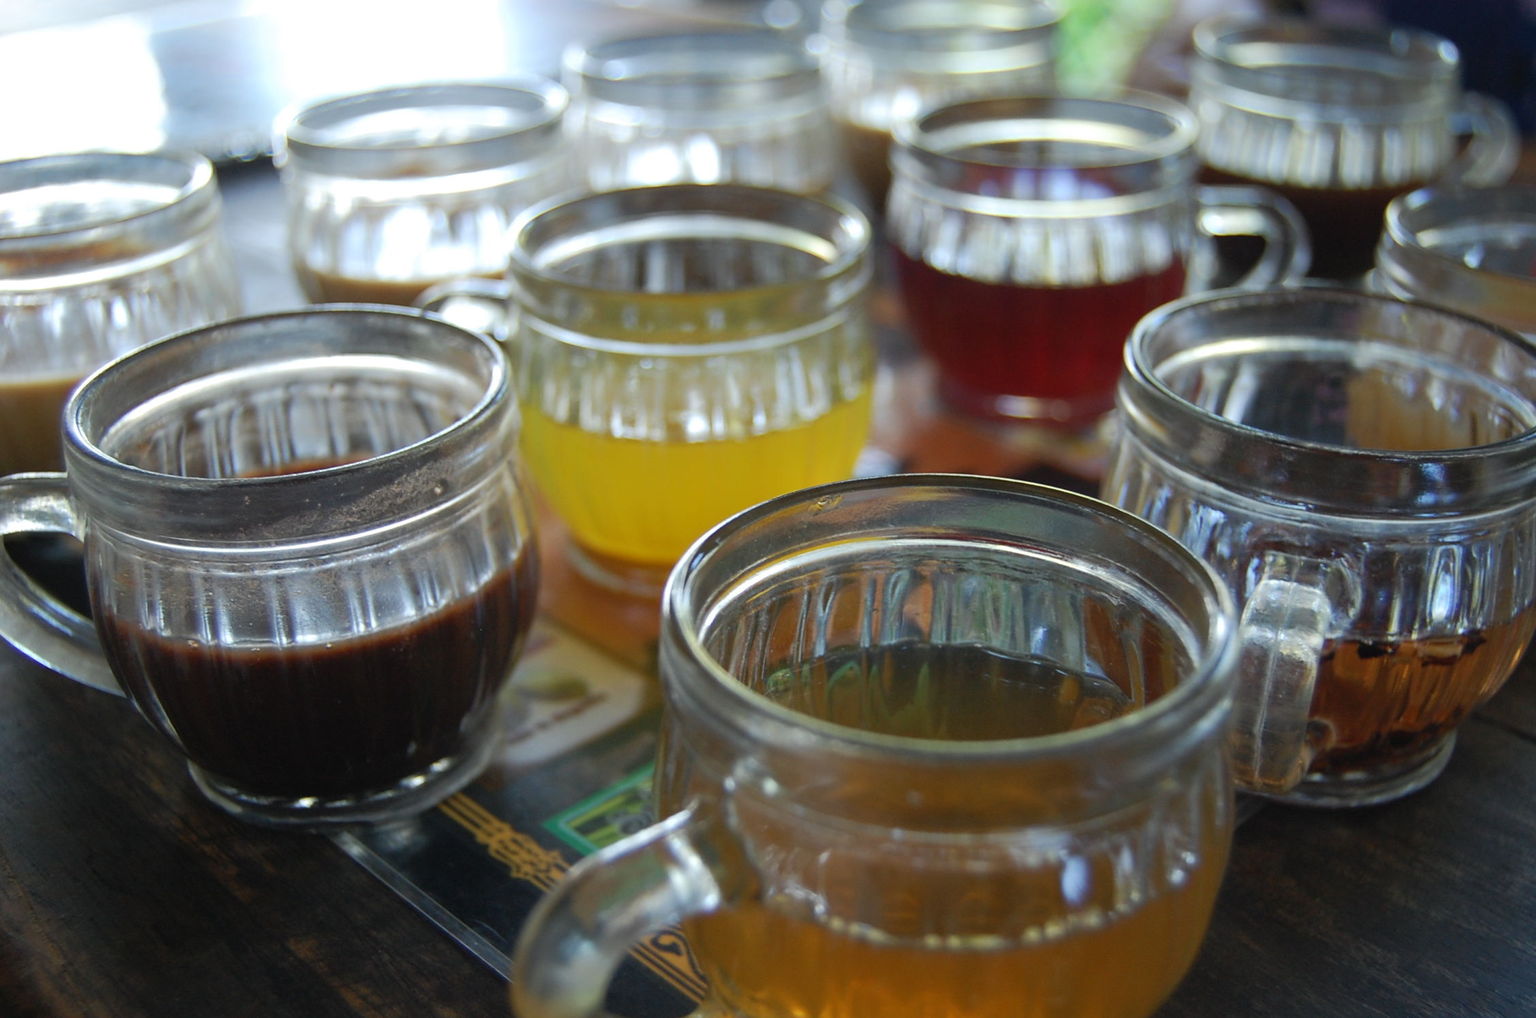 Samples of coffee and tea from the plantation